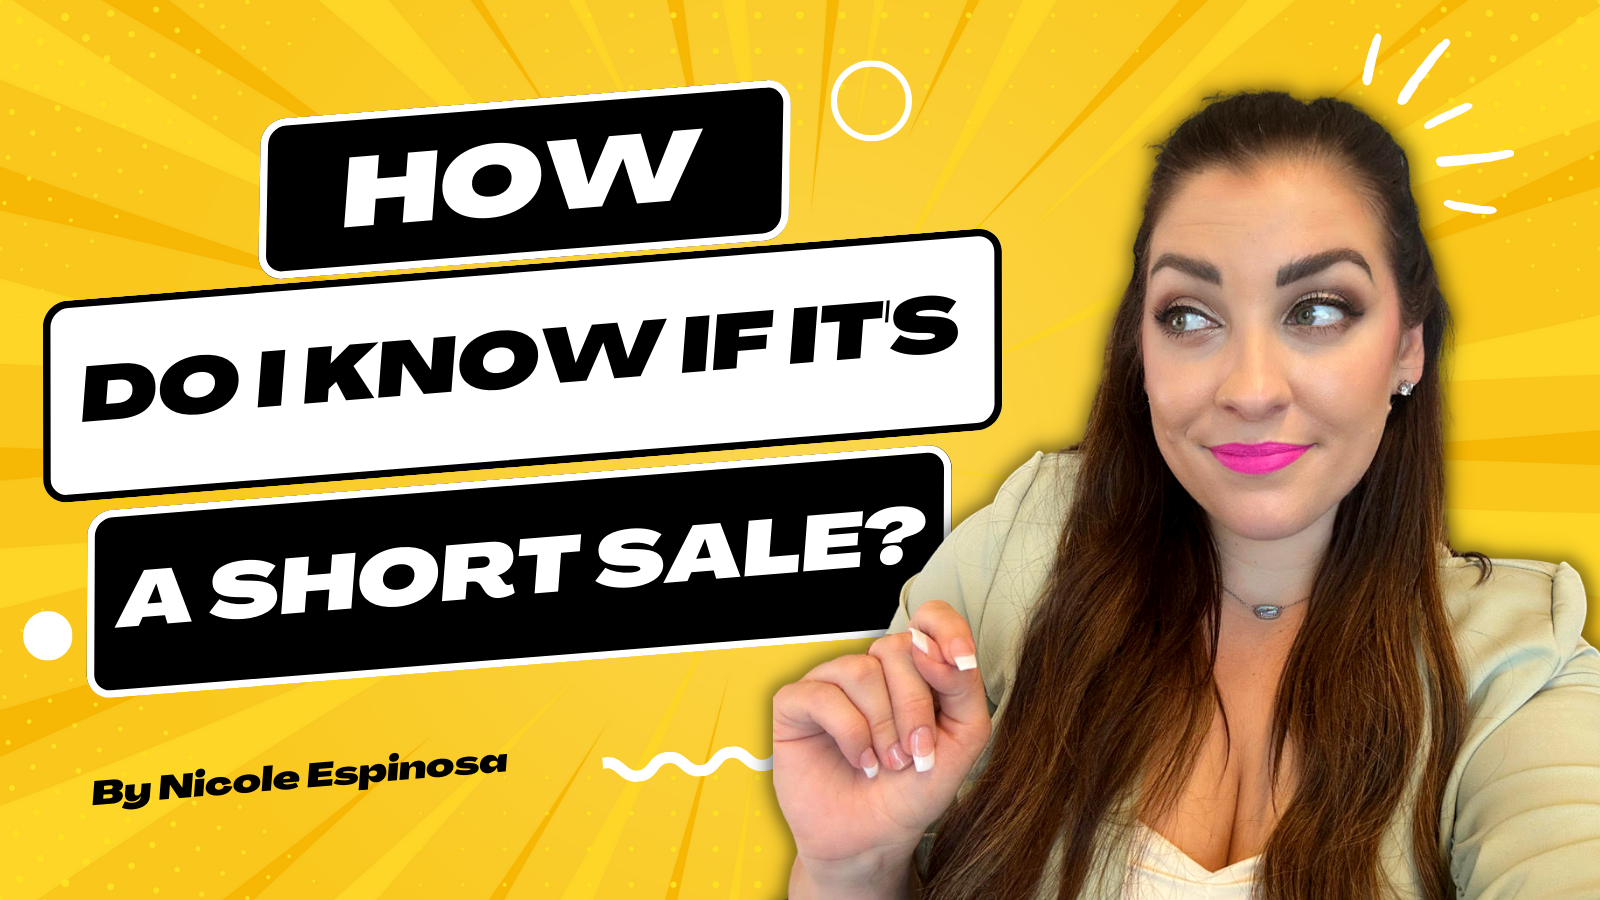 How to Identify a short sale